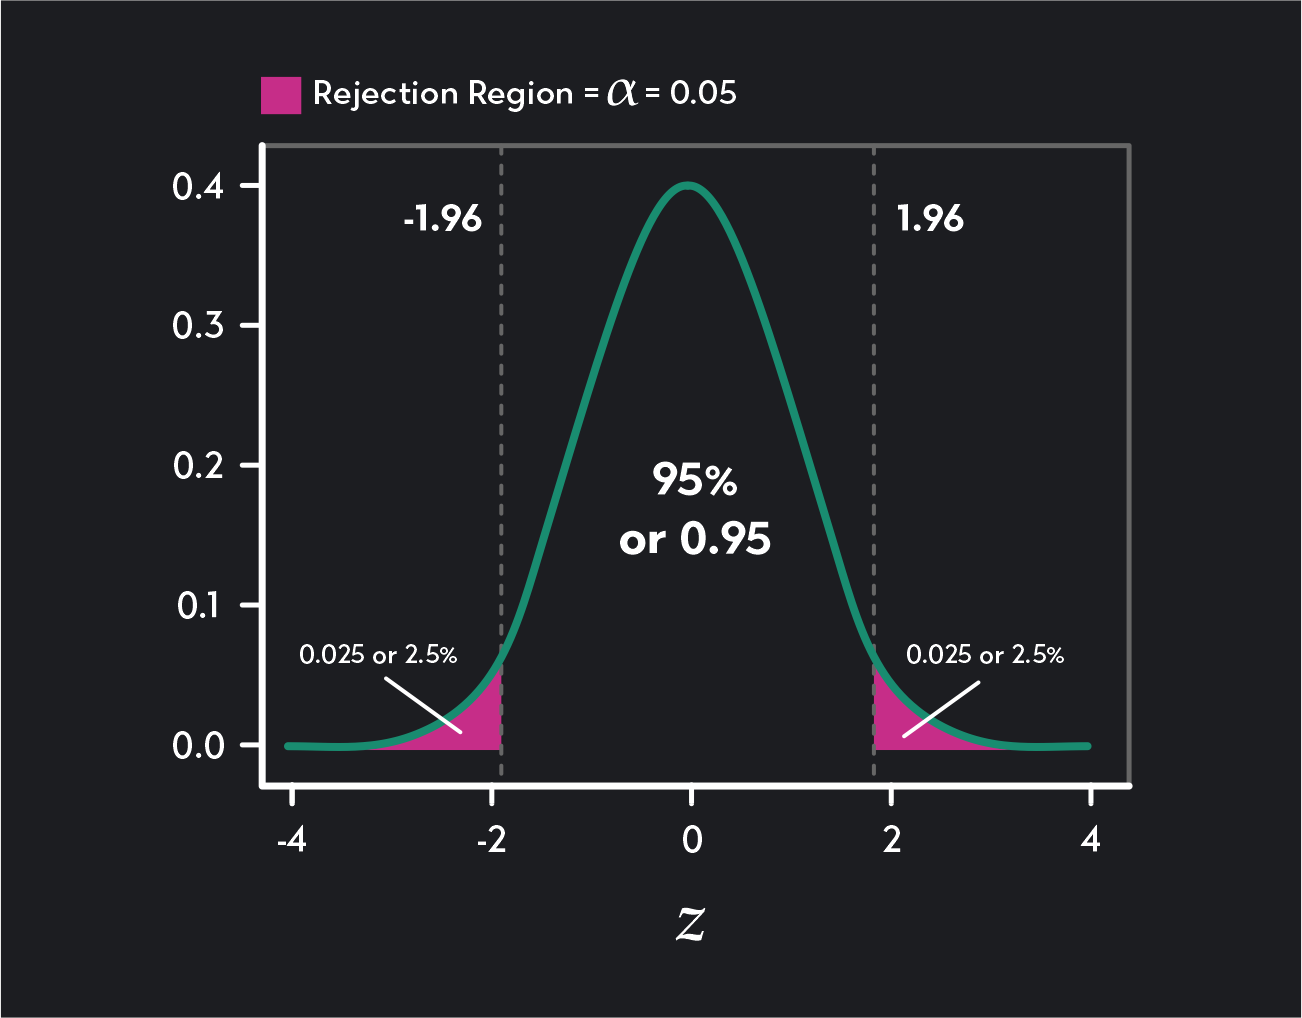 Graph showing a confidence interval of 0.95 (or 95%) between the two rejection regions.